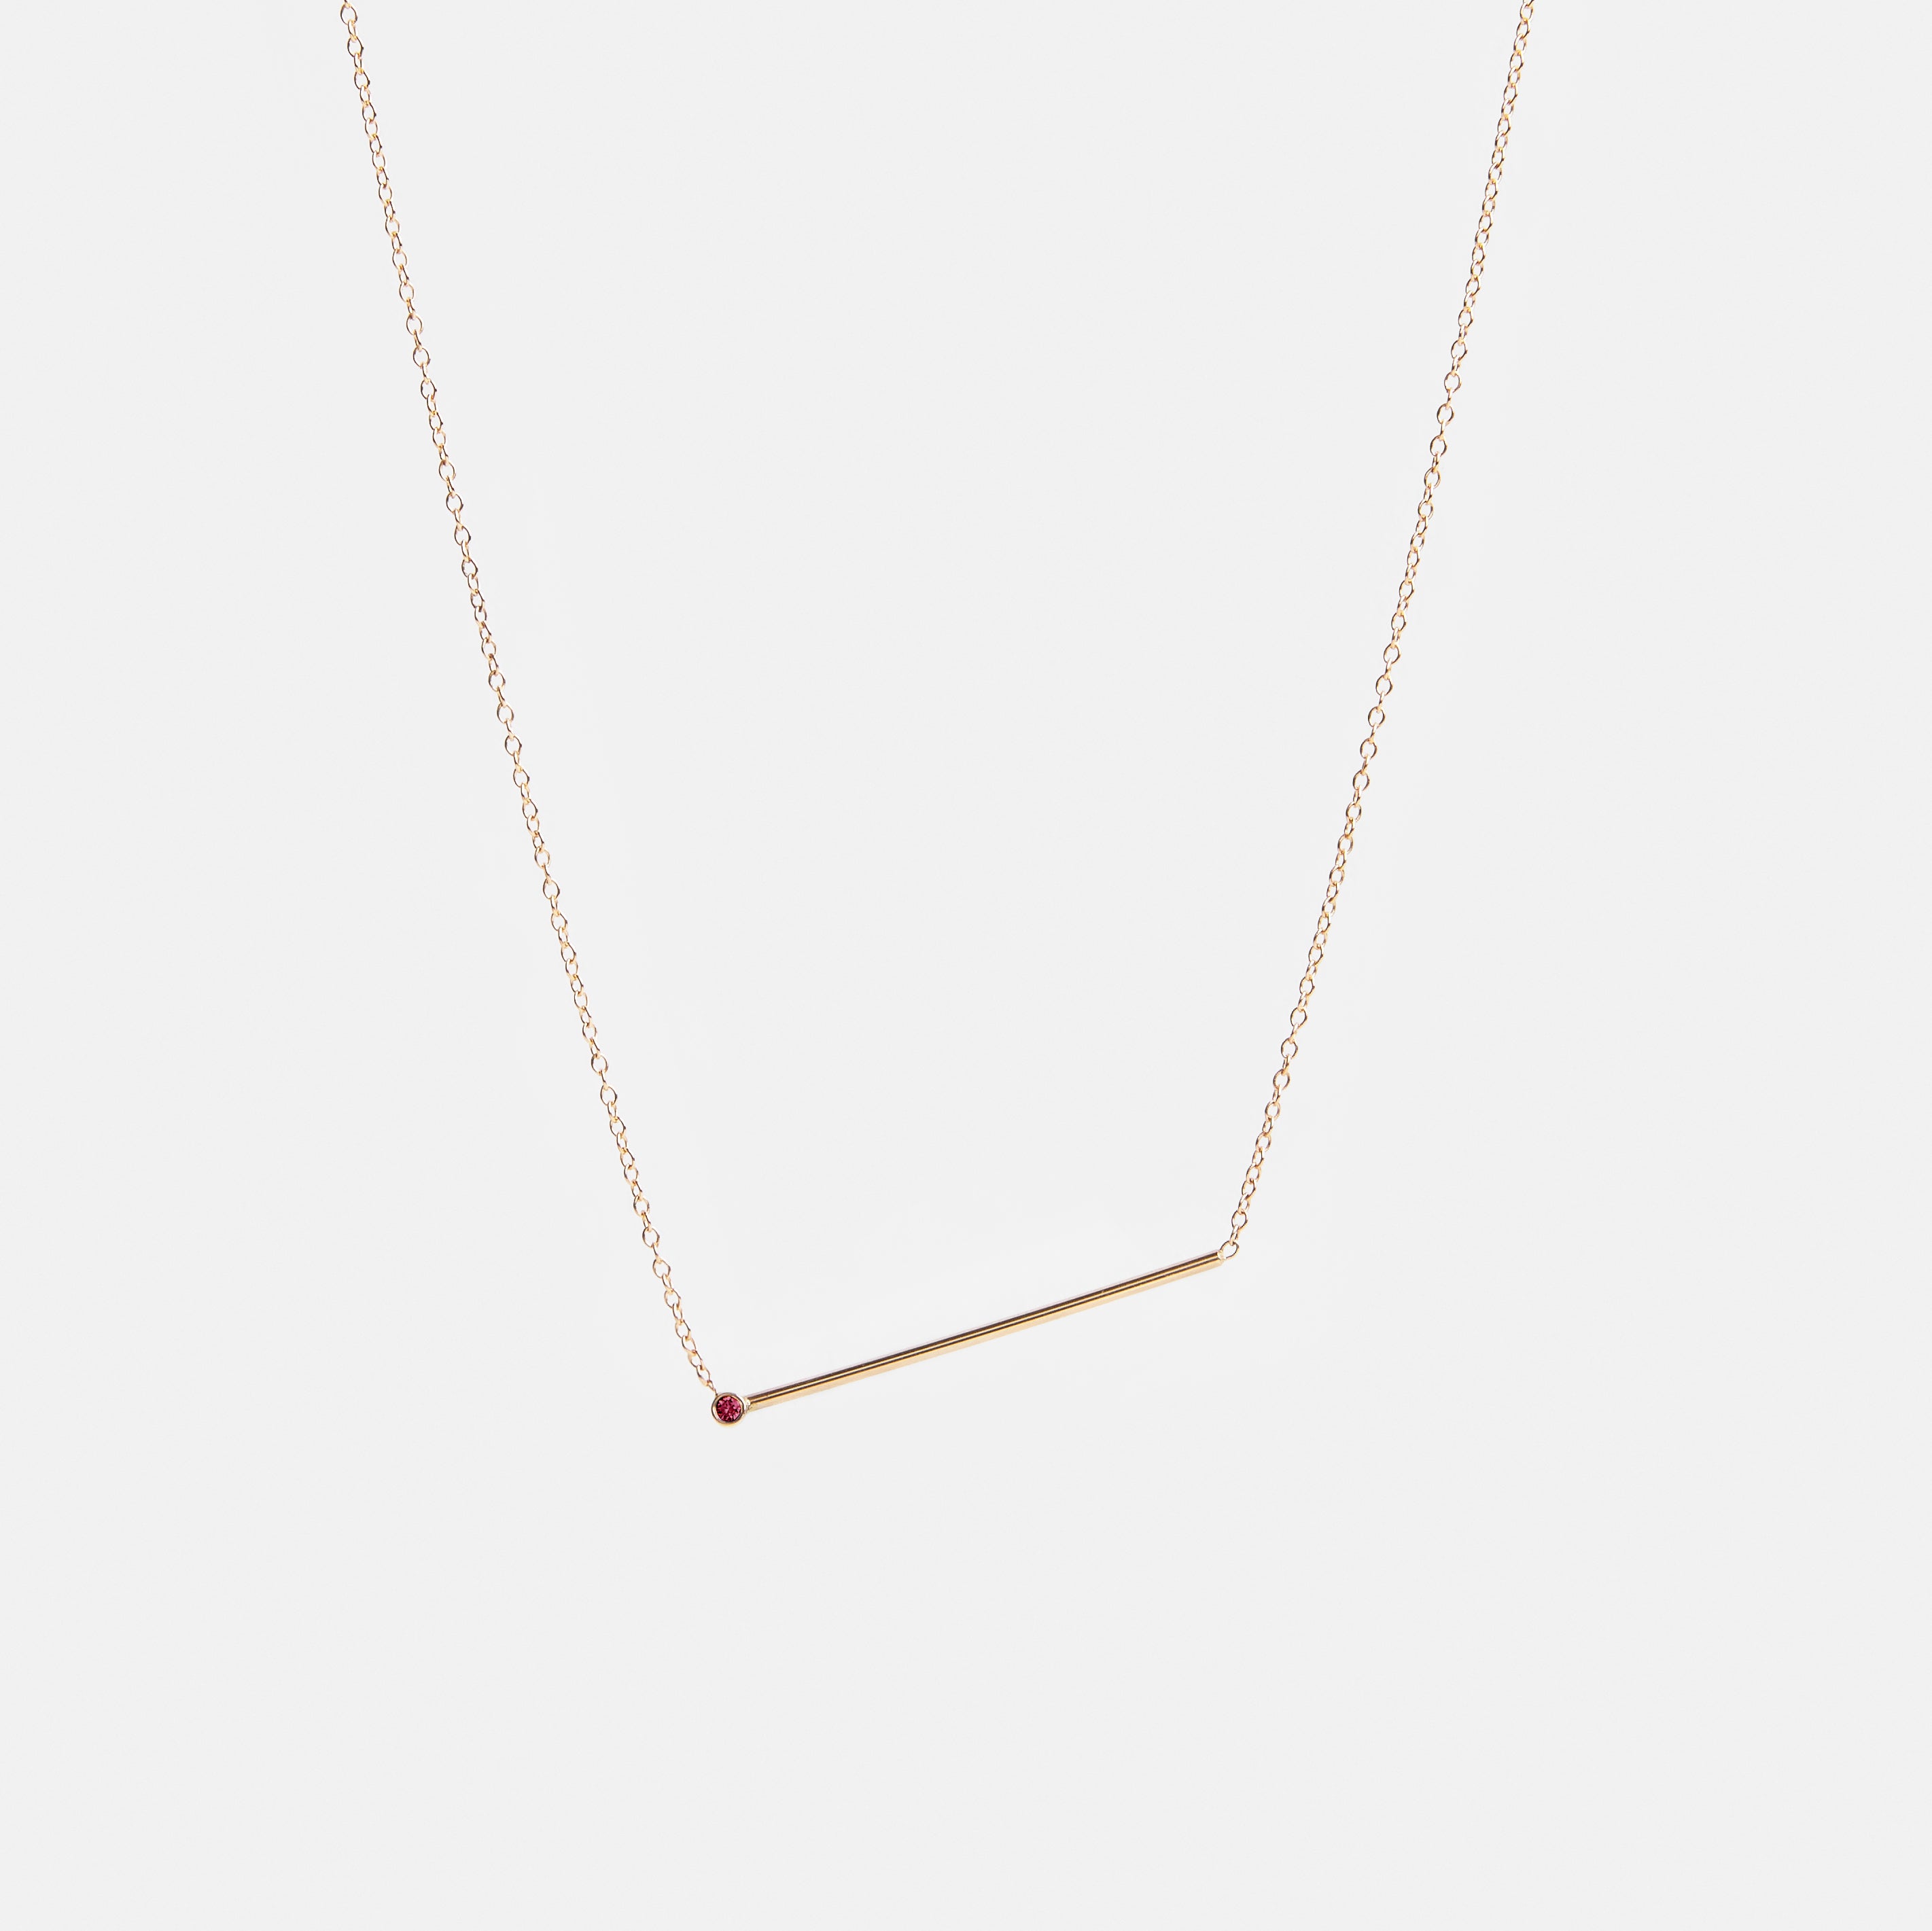 Enne Unusual Necklace in 14k Gold set with Ruby By SHW Fine Jewelry NYC